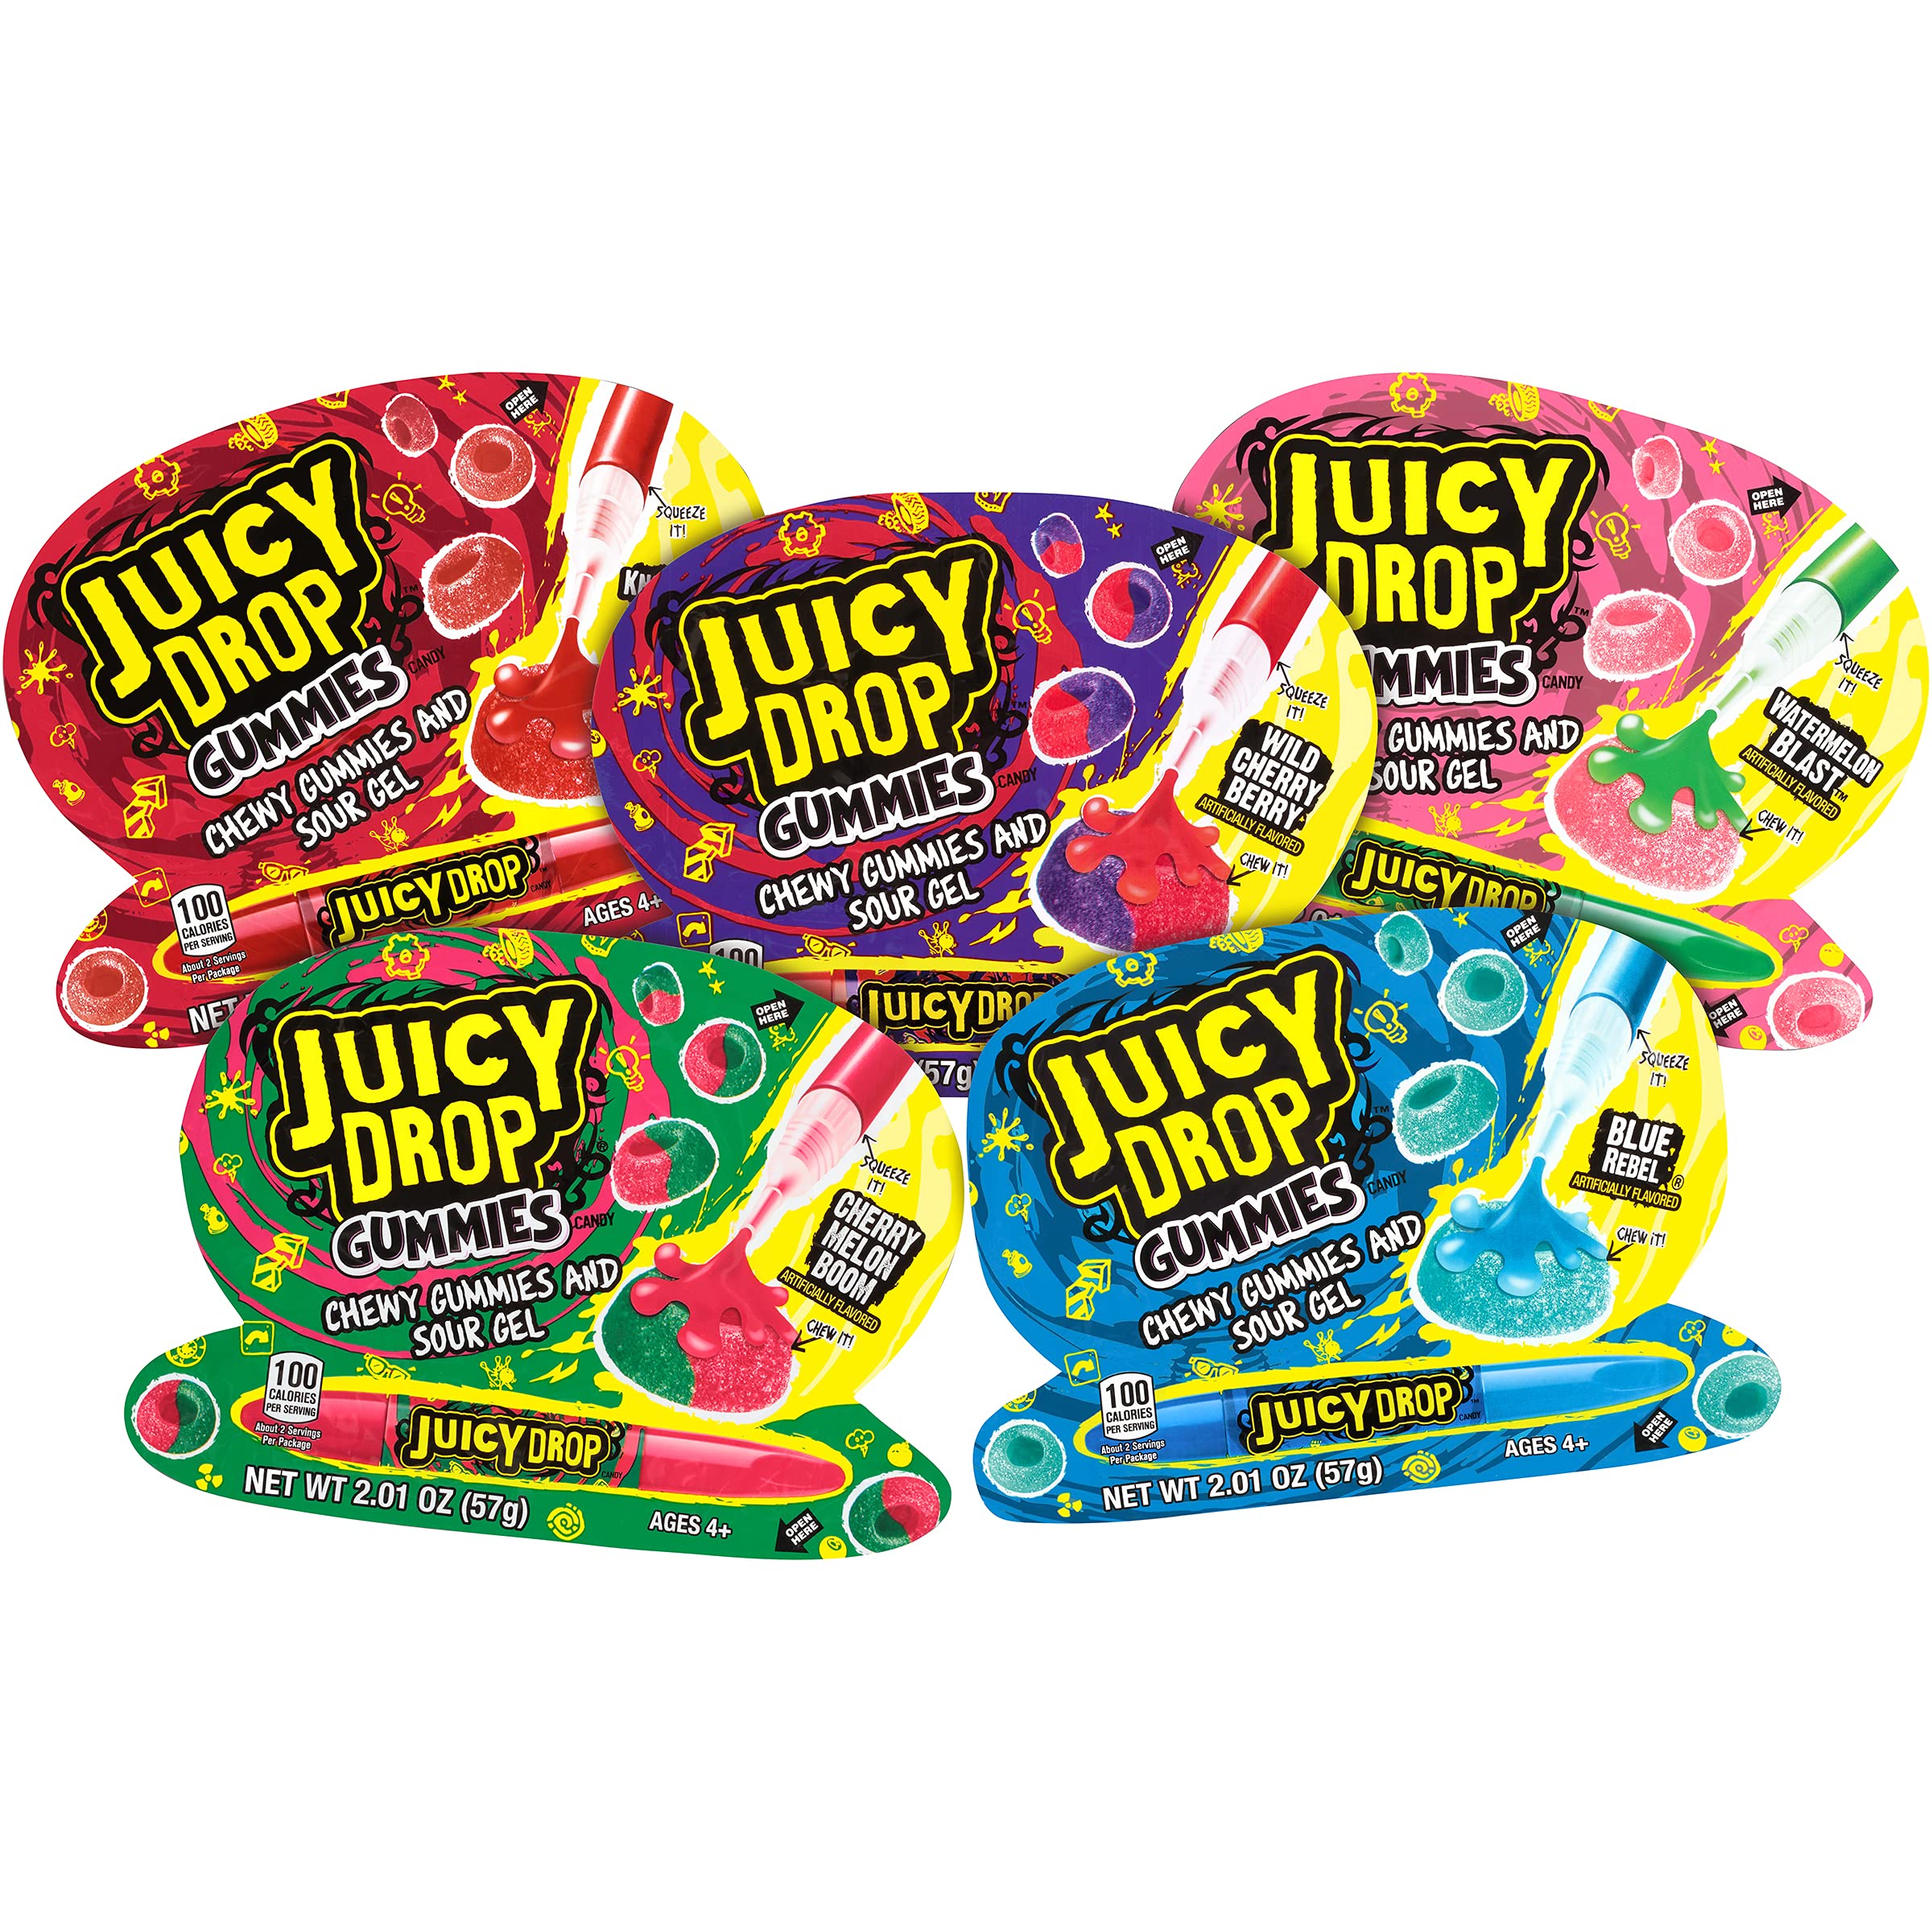 Juicy Drop Gummies And Sour Gel 57g Crowsnest Candy Company 